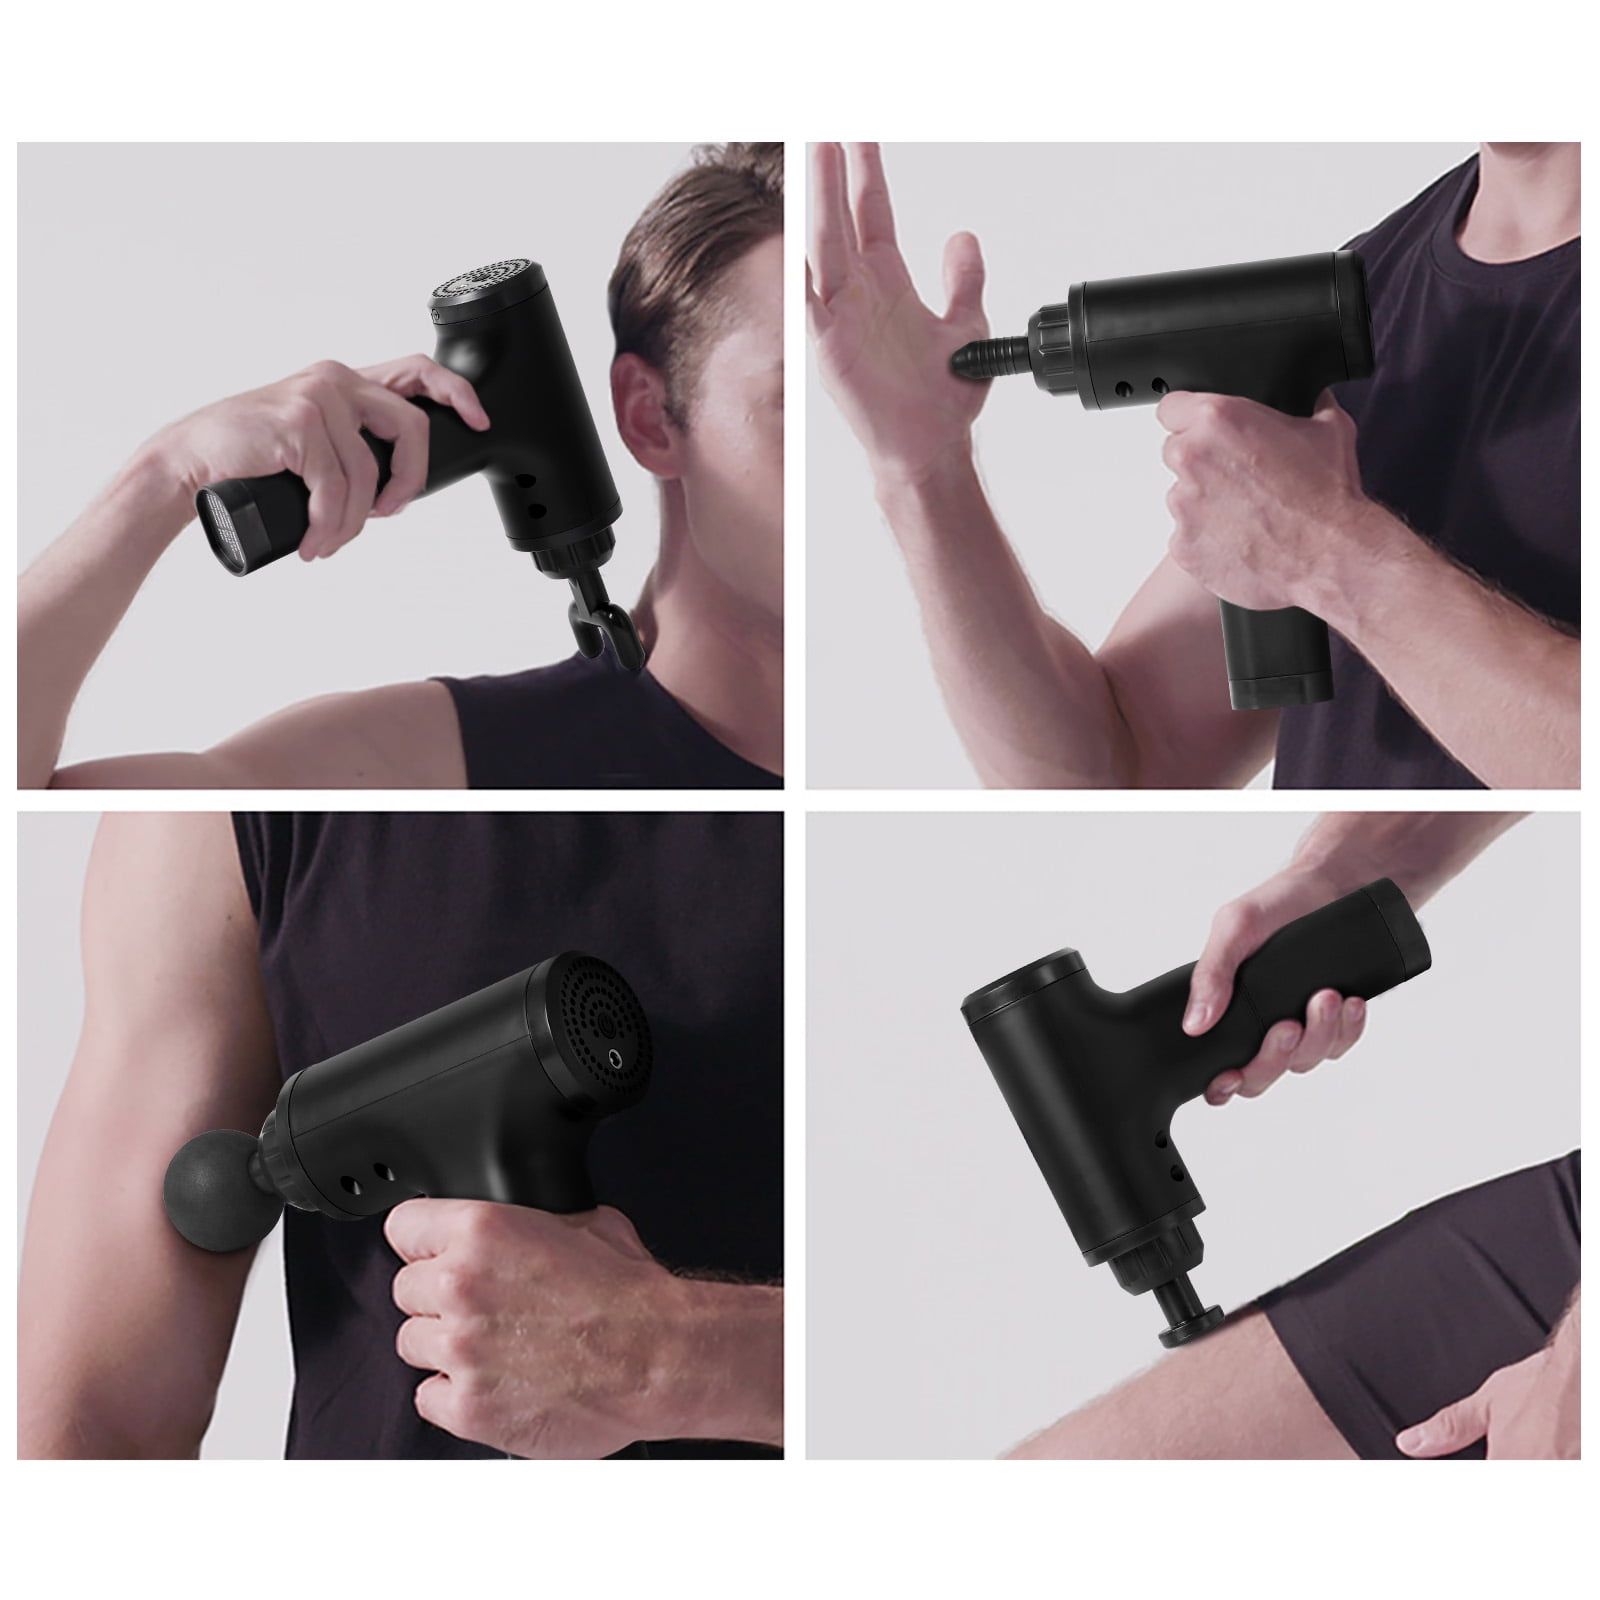 How To Use A Massage Gun On Your Back For Pain And Aches – Fit Body Factory